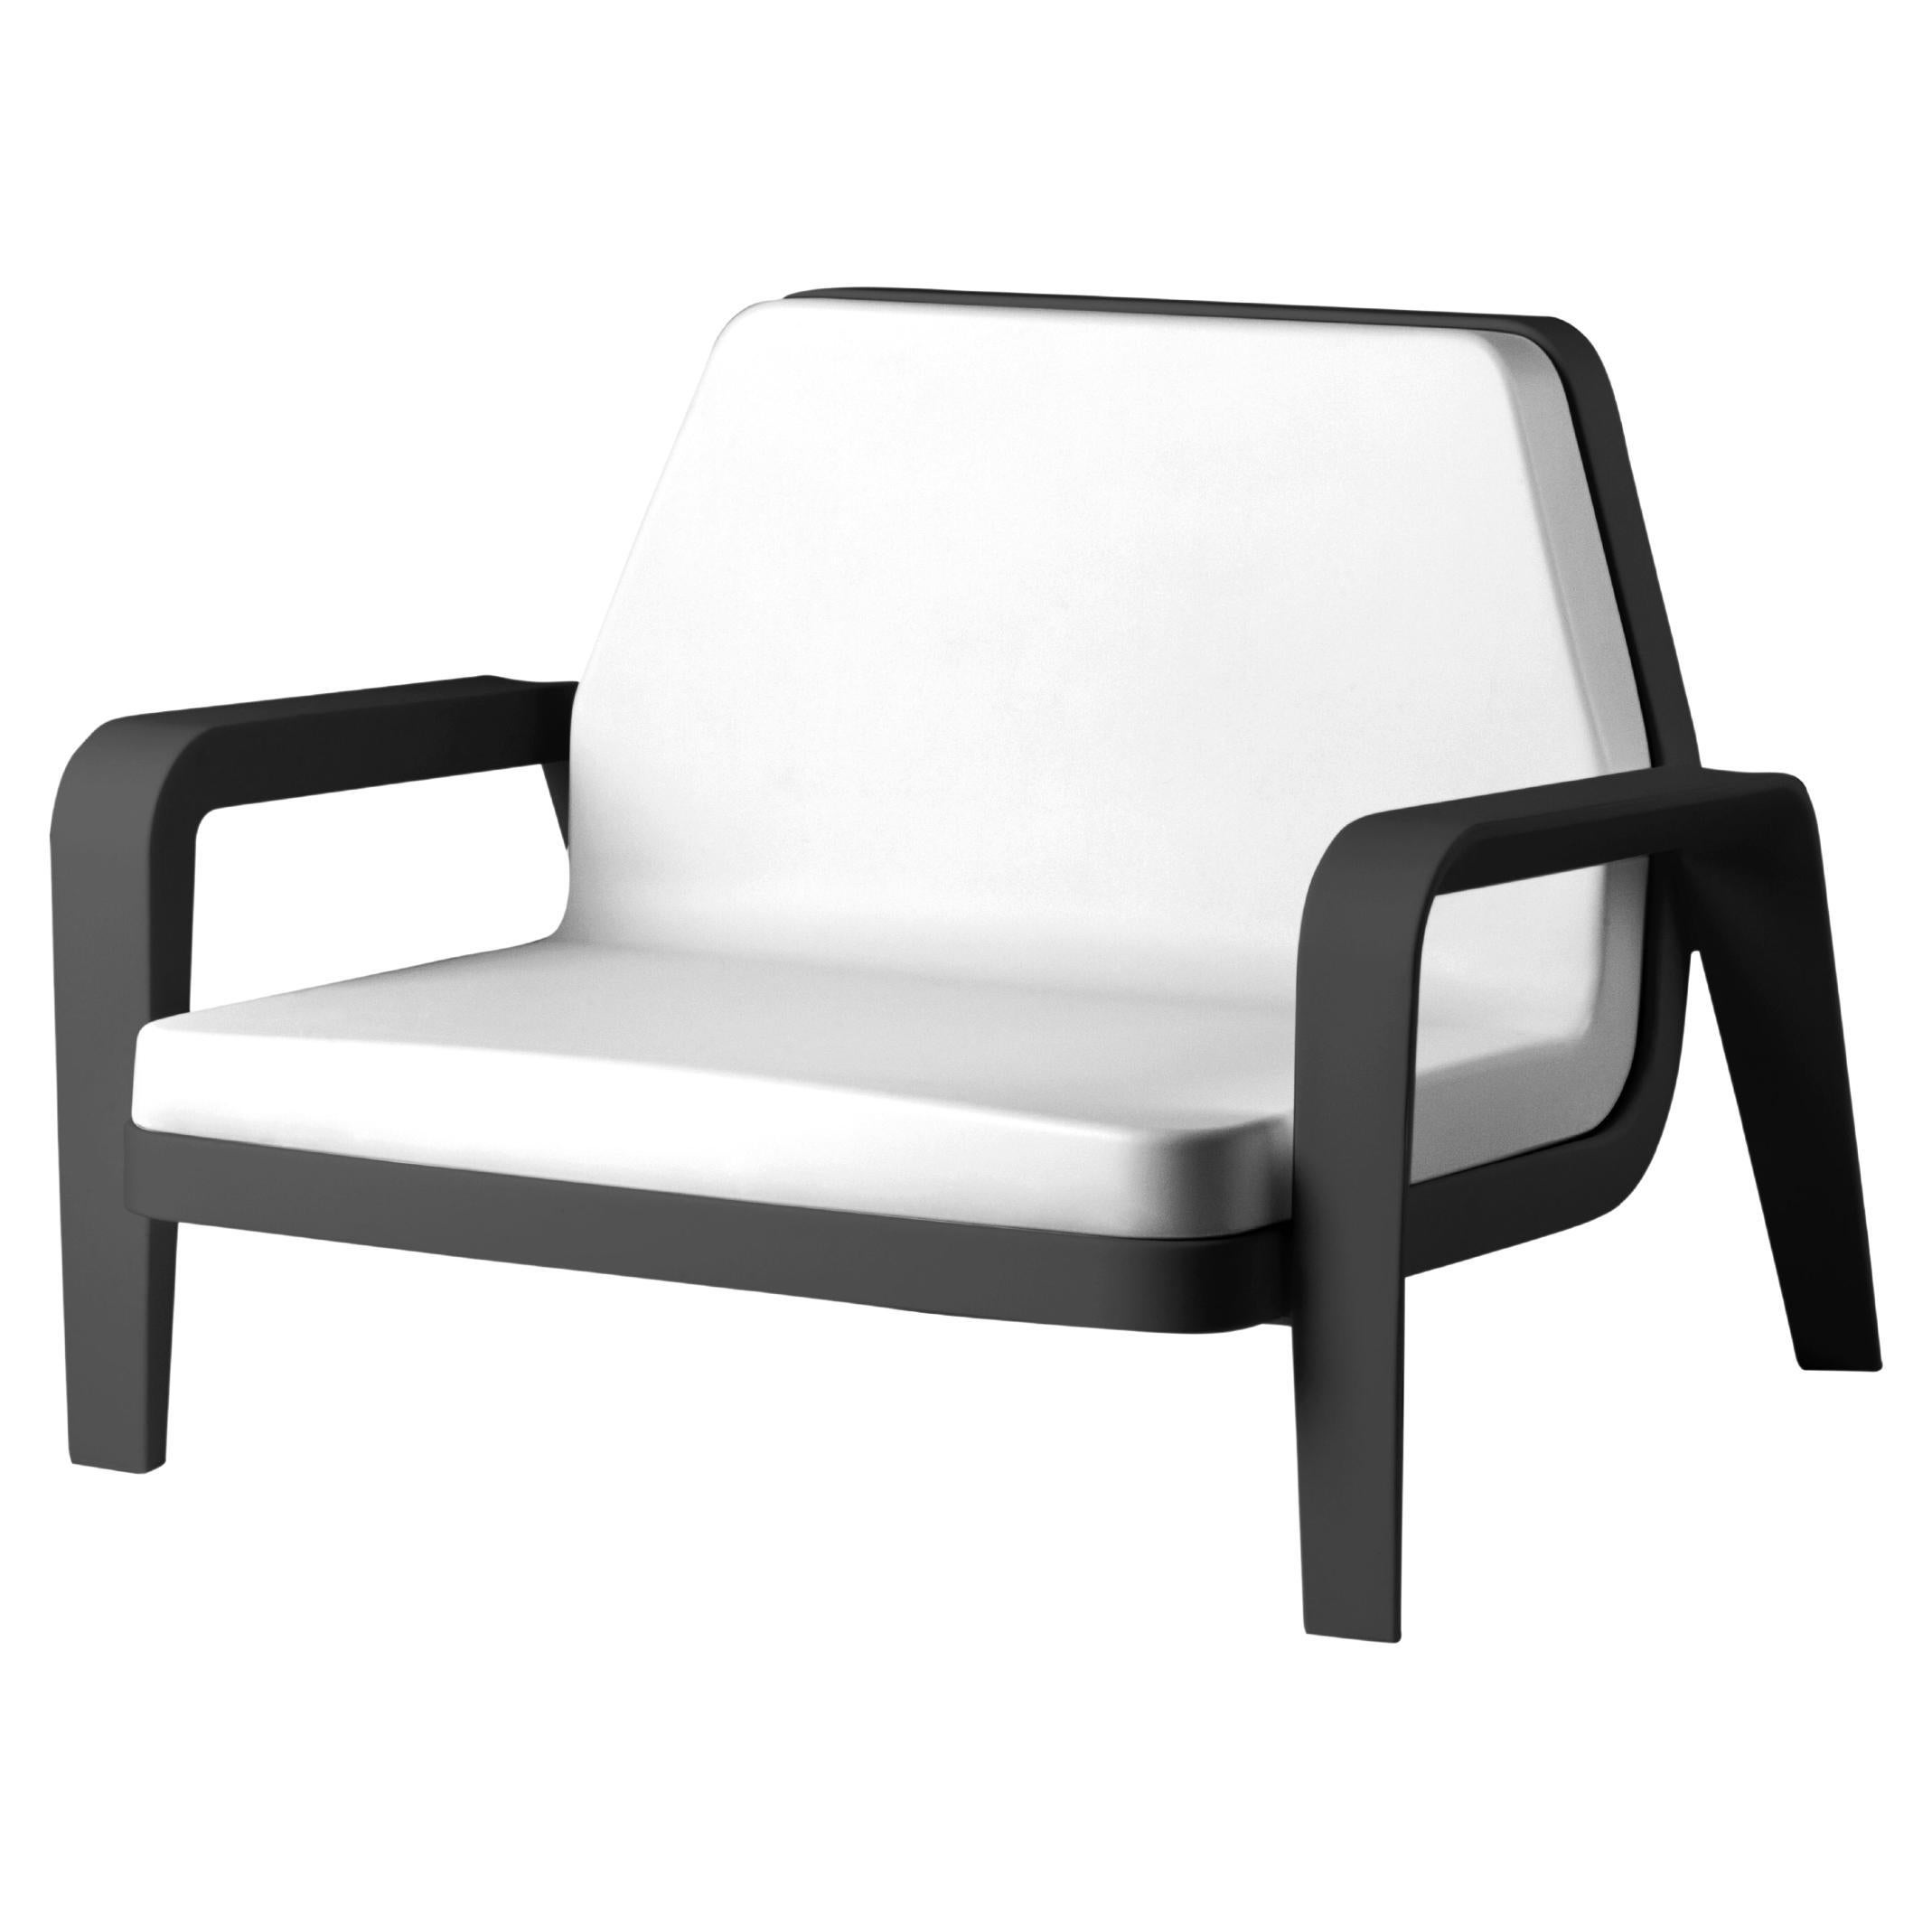 Slide Design America Armchair in Soft White Fabric with Jet Black Frame